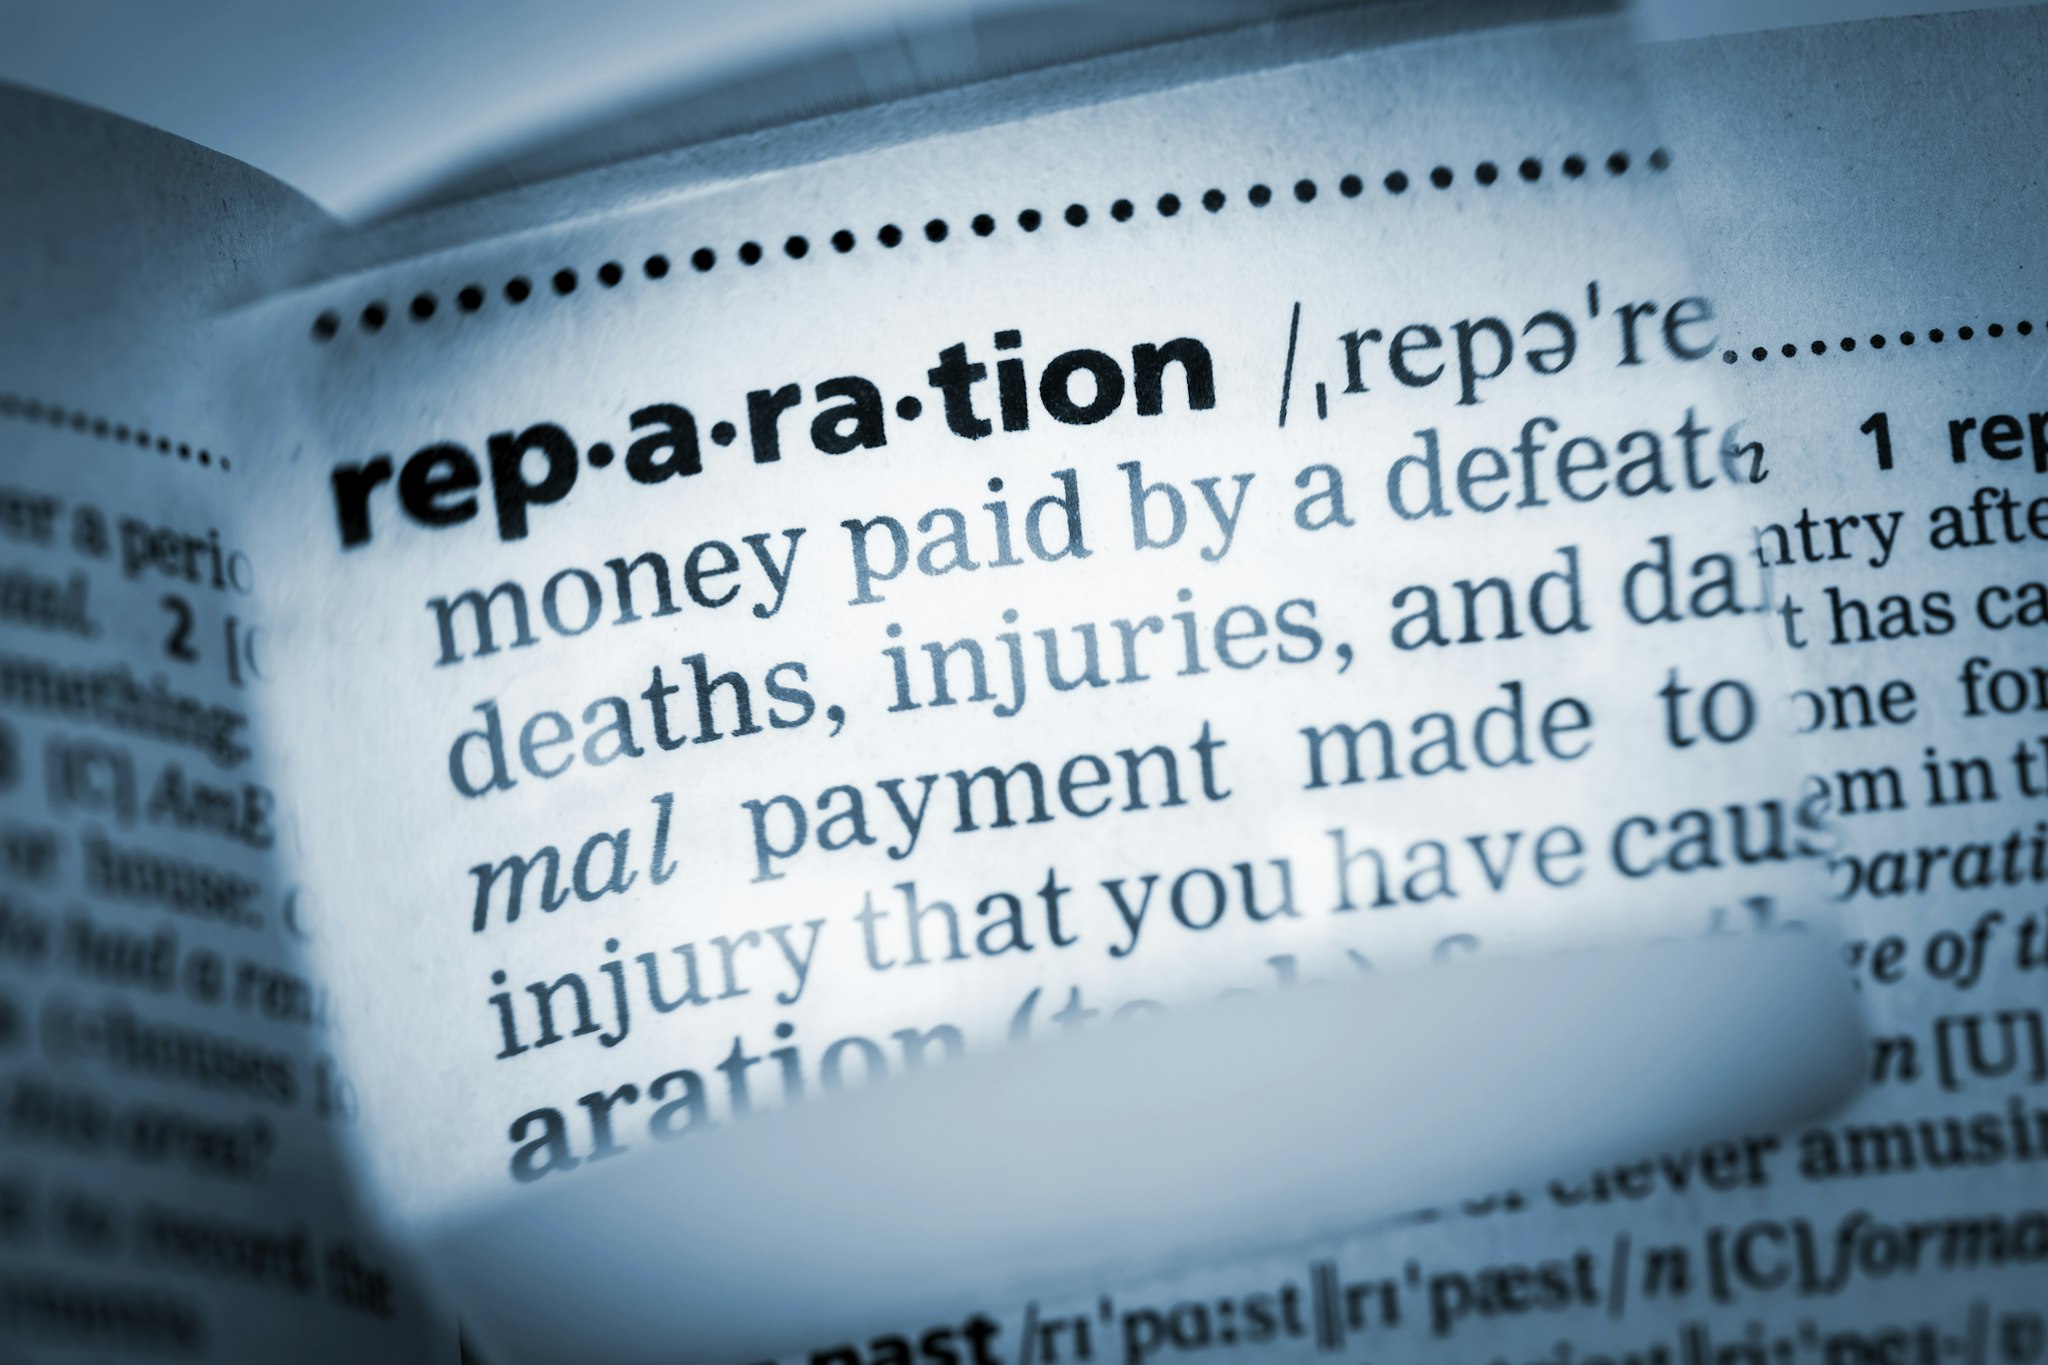 The Dictionary definition of the word “reparation” photo taken through magnifying glass from a page of a dictionary with selective focus.